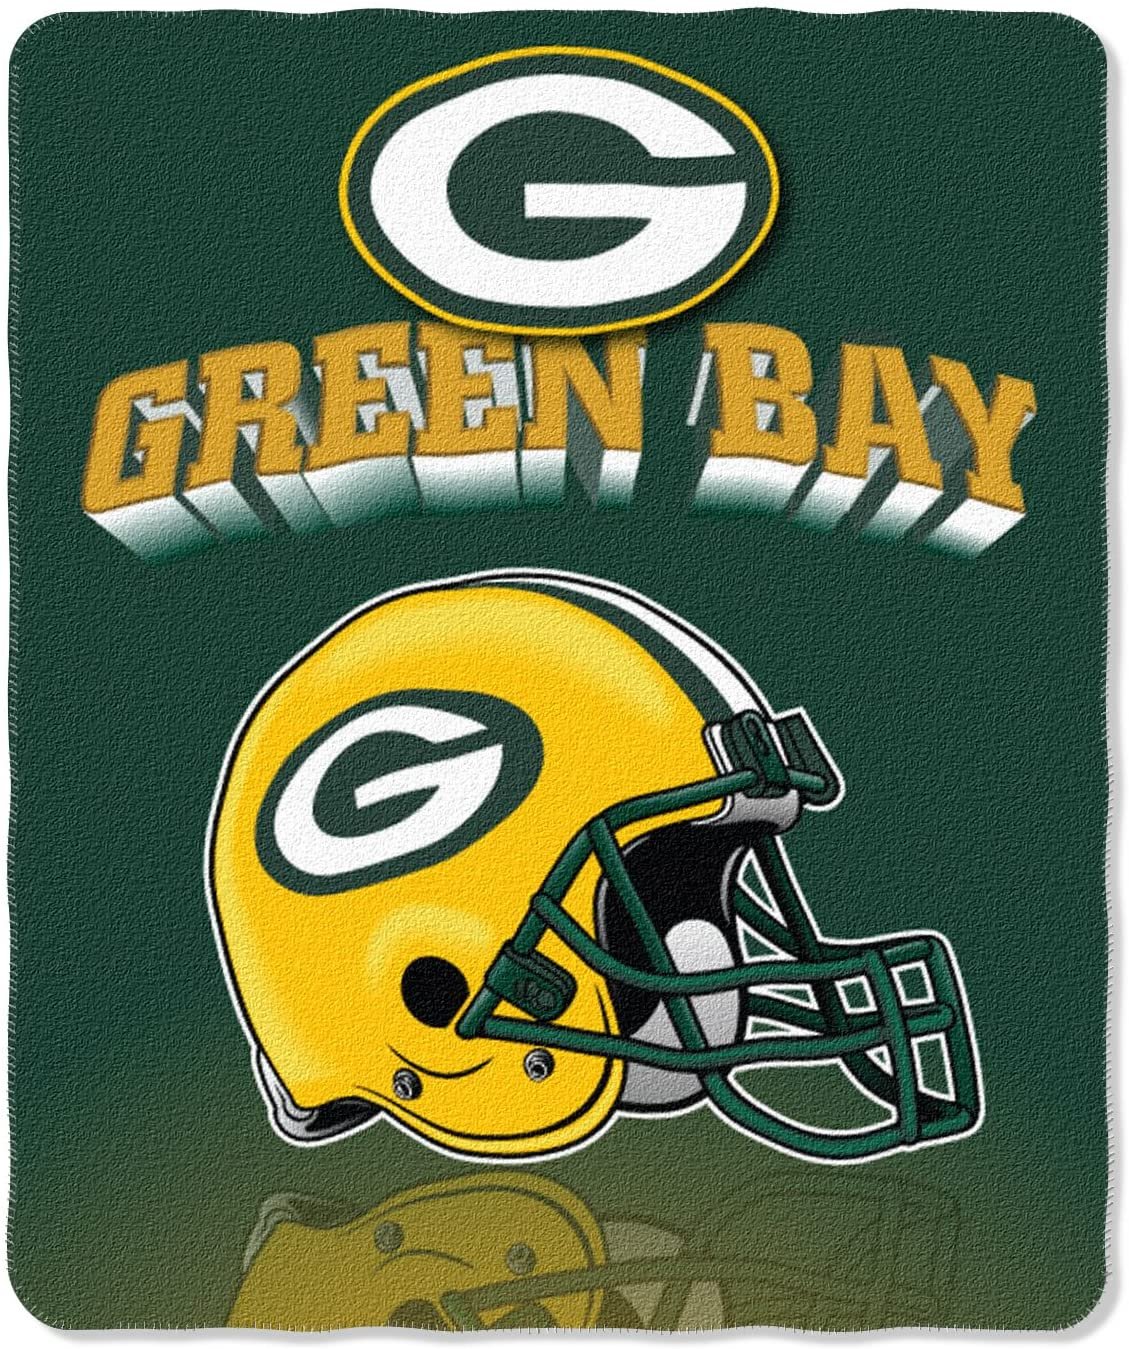 Green Bay Packers Gridiron Fleece Throw, 50-inches x 60-inches